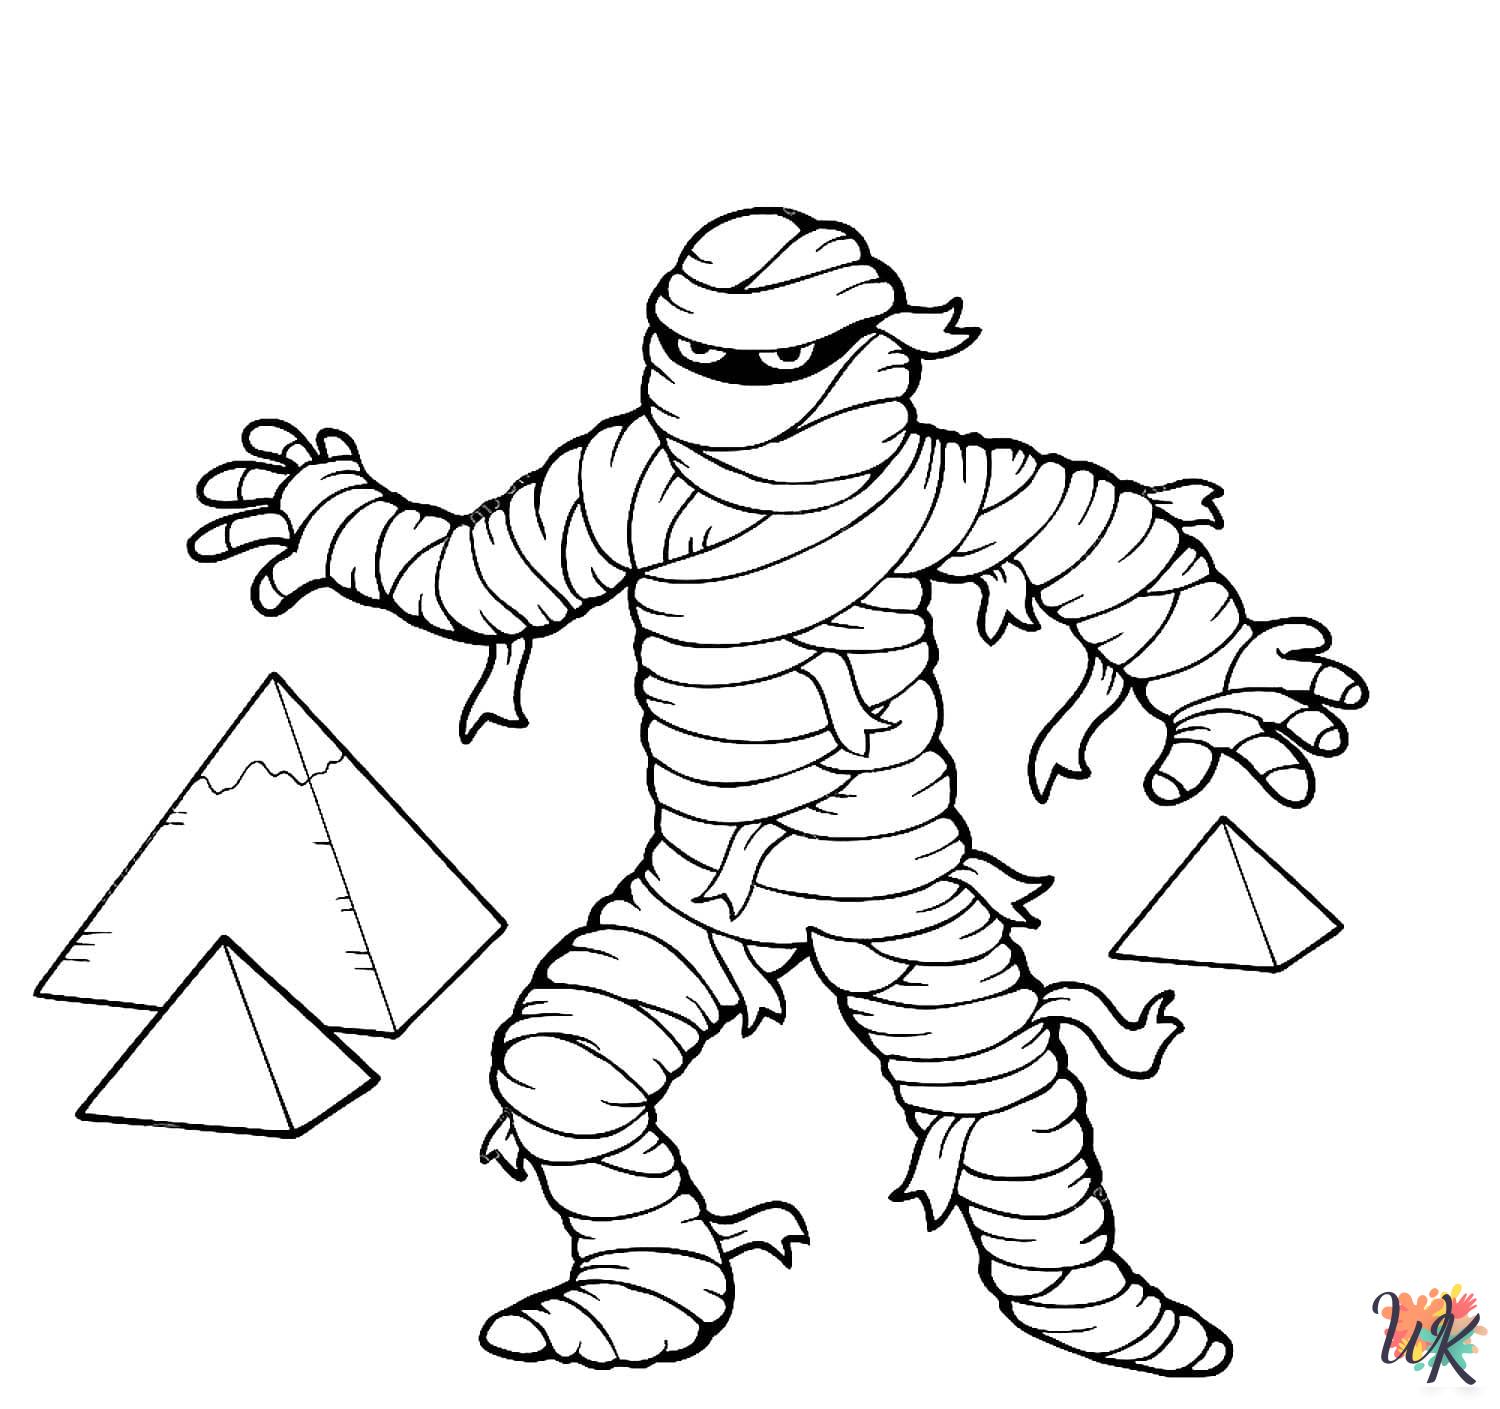 Mummy coloring pages easy